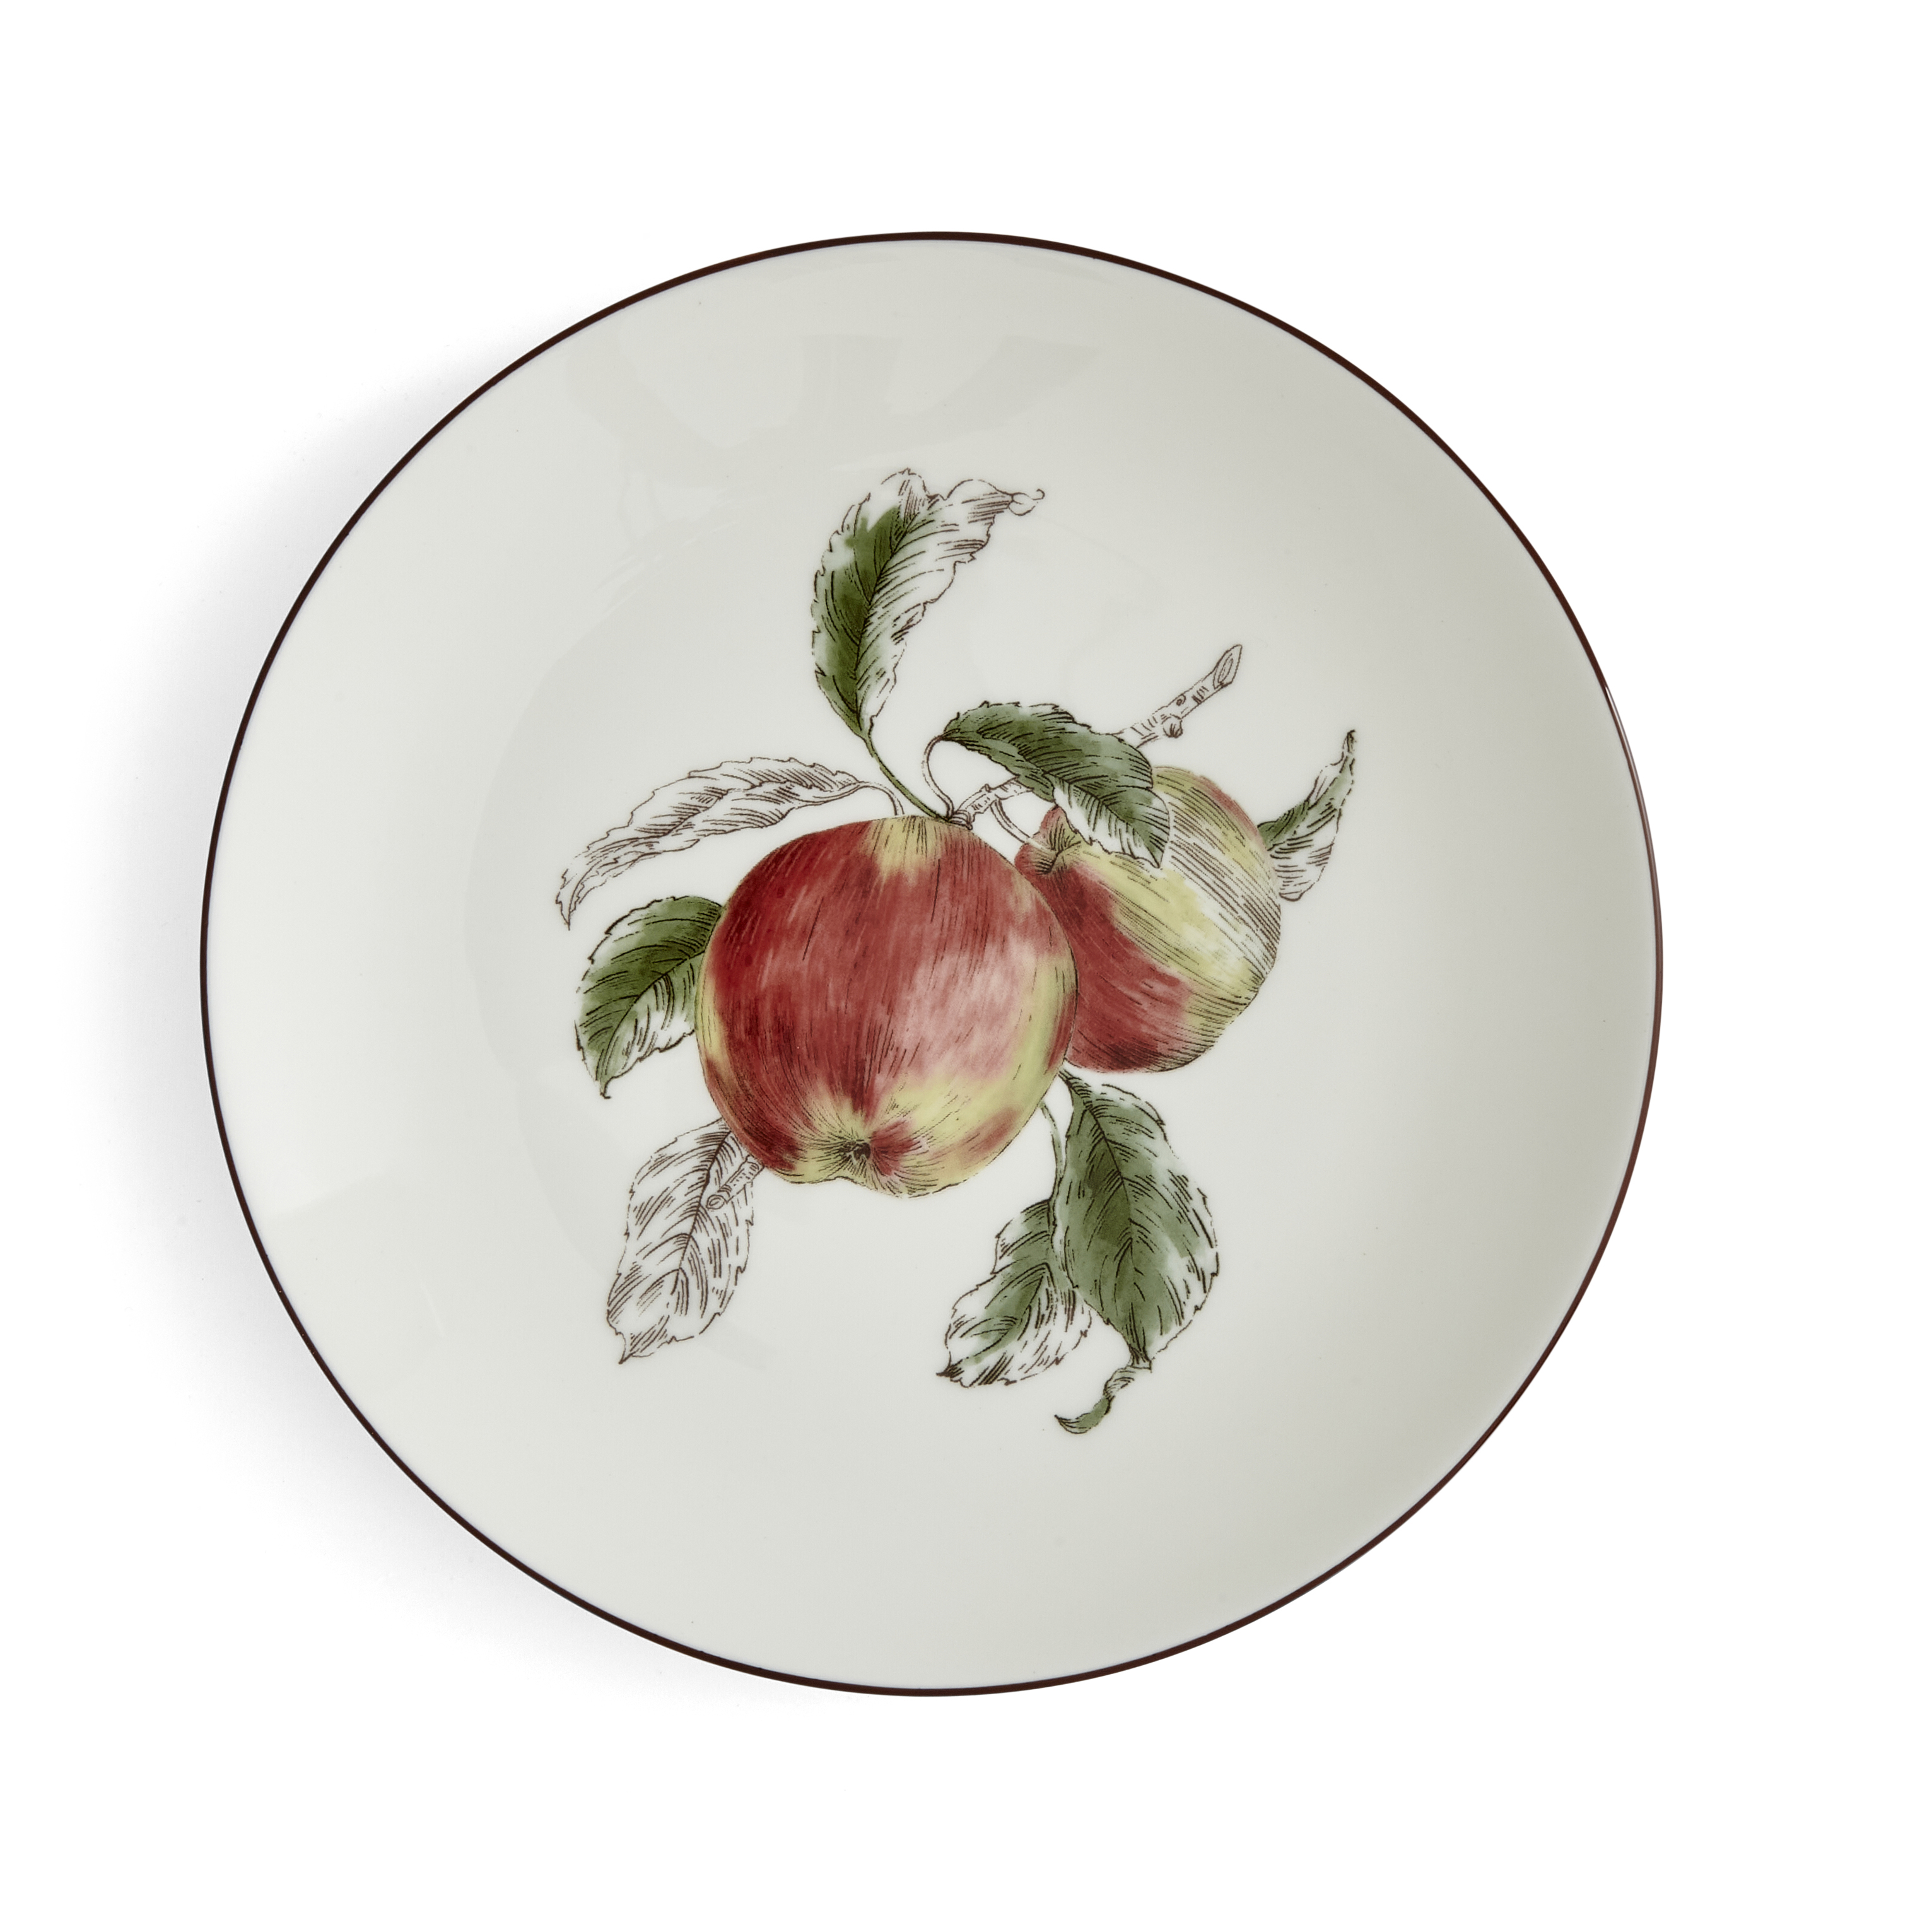 Nature's Bounty 9.5" Salad Plate (Apple) image number null